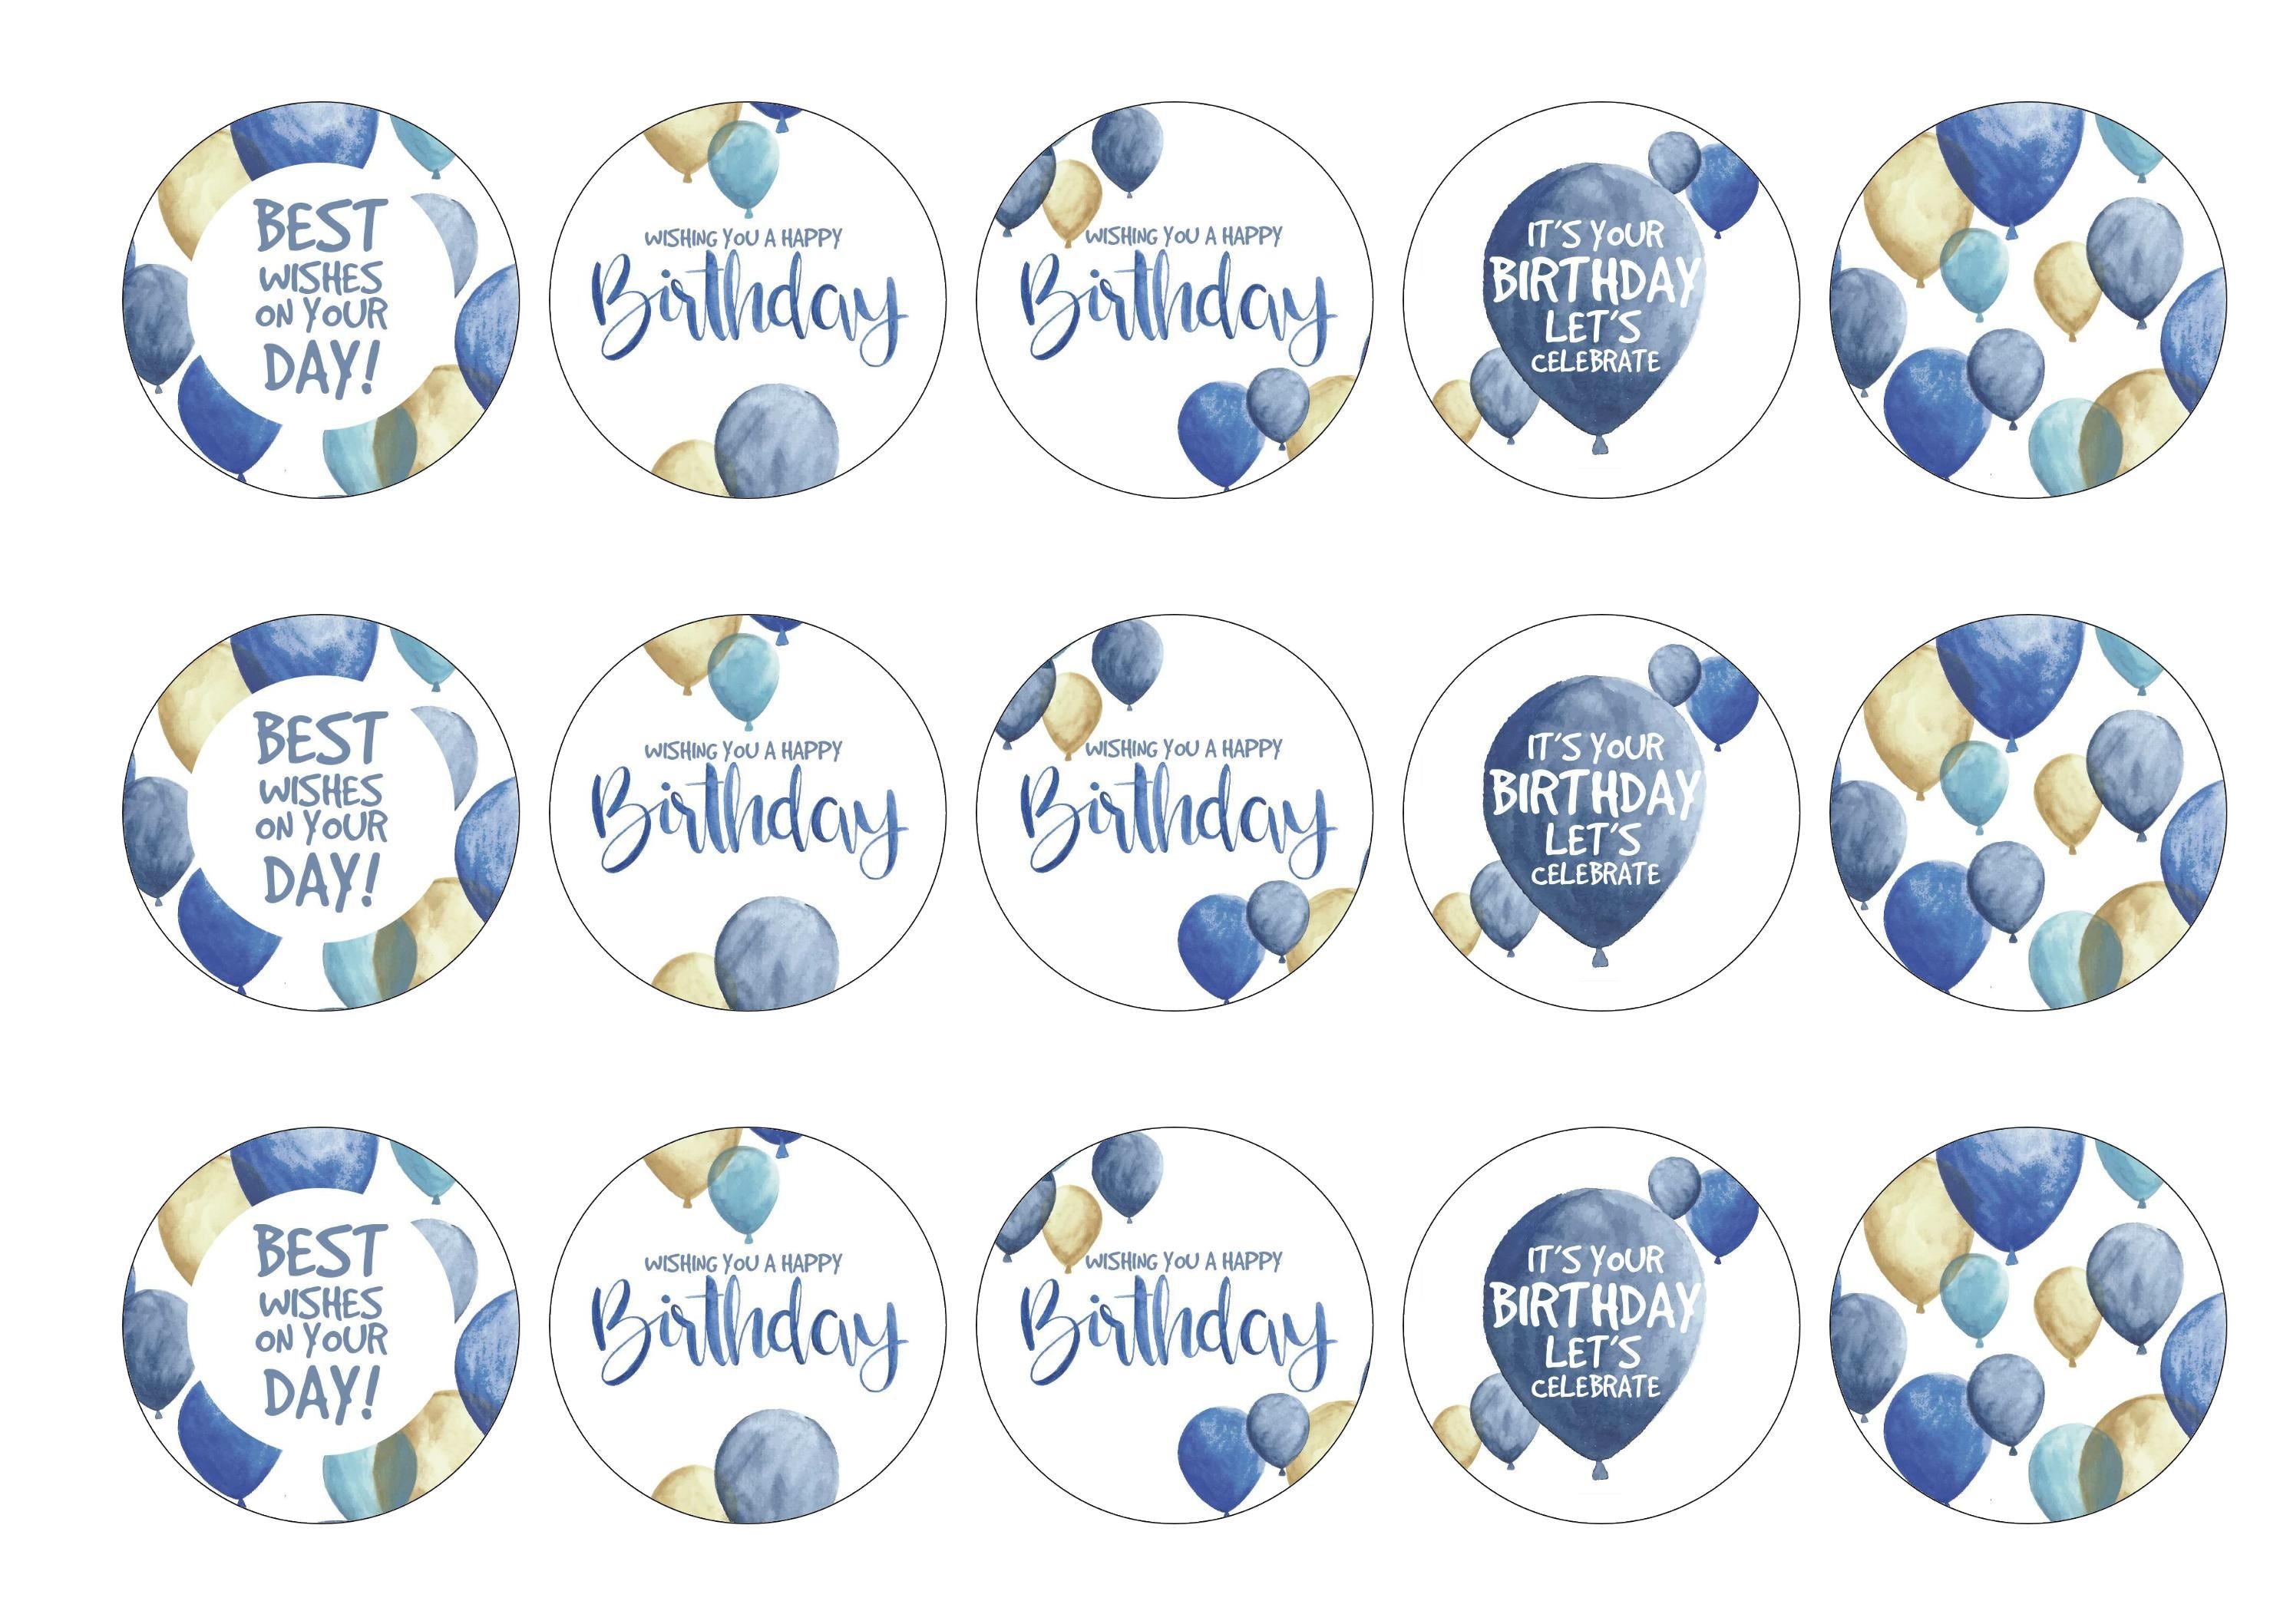 15 printed cupcake toppers with a blue balloon birthday design